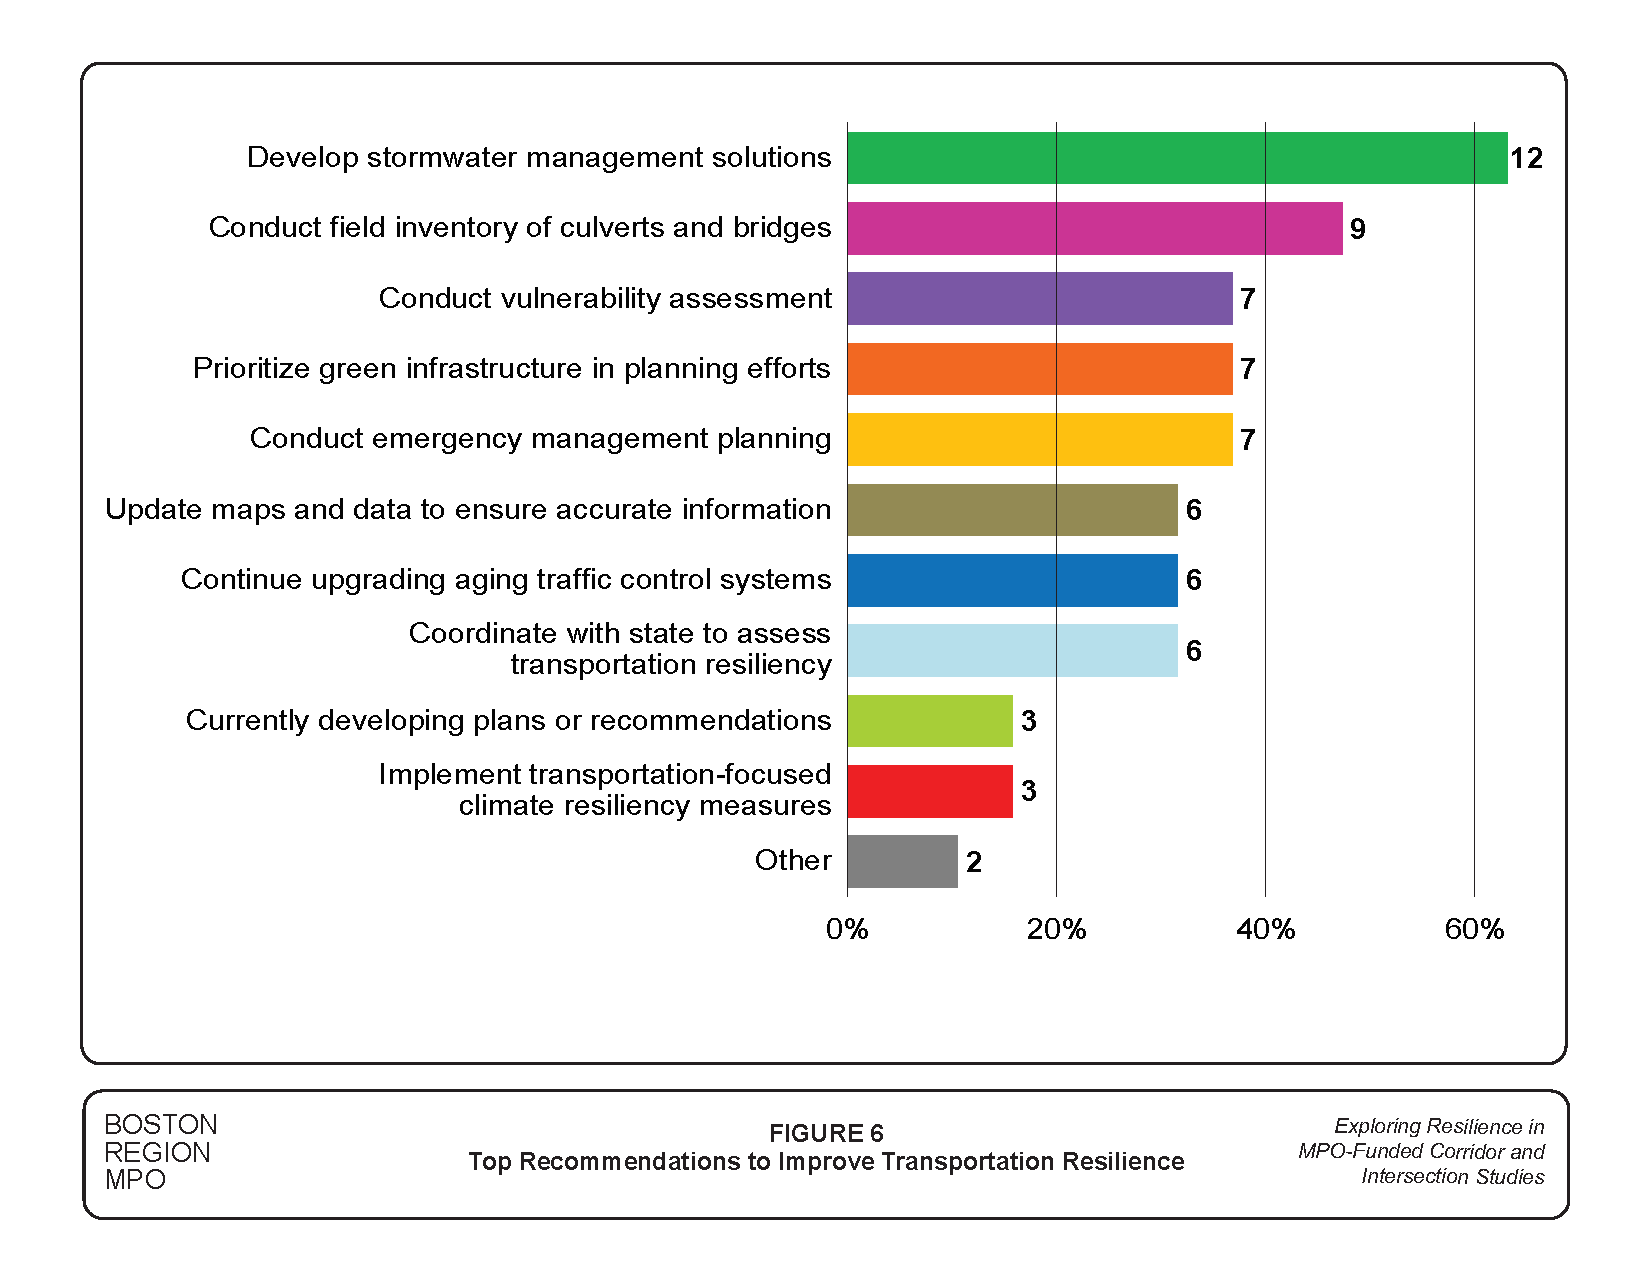 Figure 6 is a graph showing the survey results about the top recommendations to improve transportation resilience.